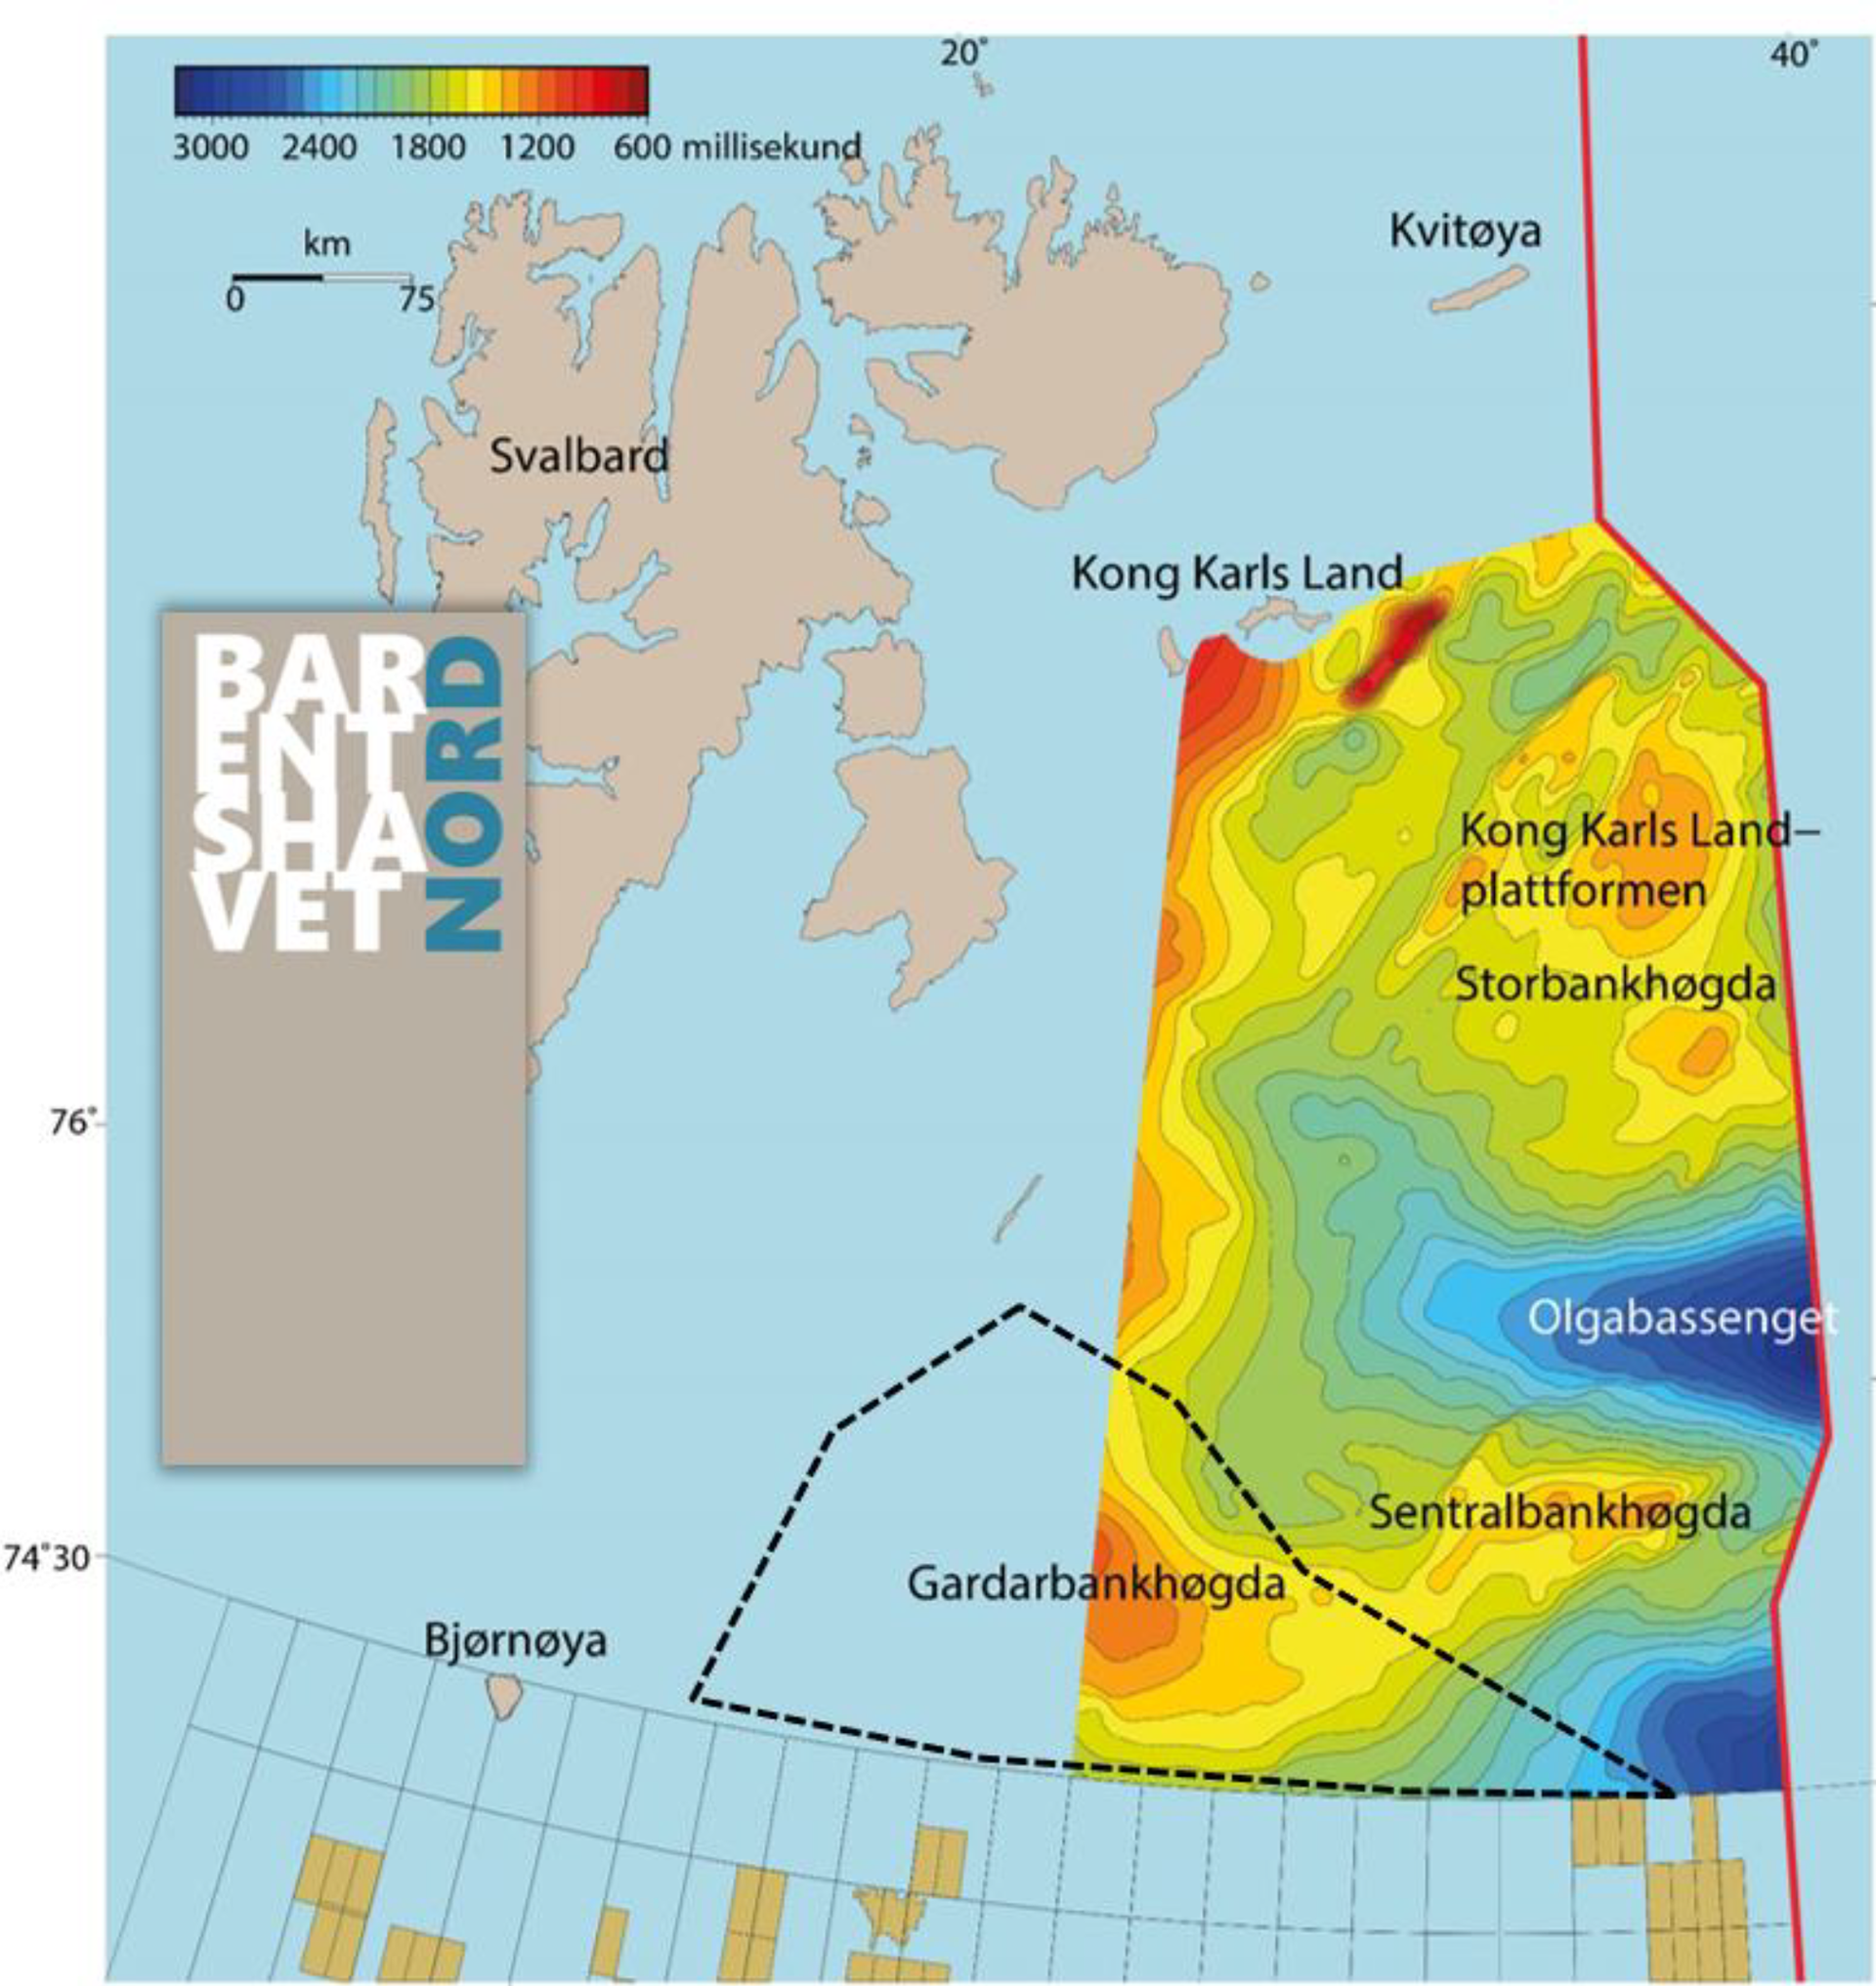 The map shows the acquisition area around the Gardarbank High in relation to the area in the eastern part of the Barents Sea North, which was presented by the NPD in the spring of 2017.